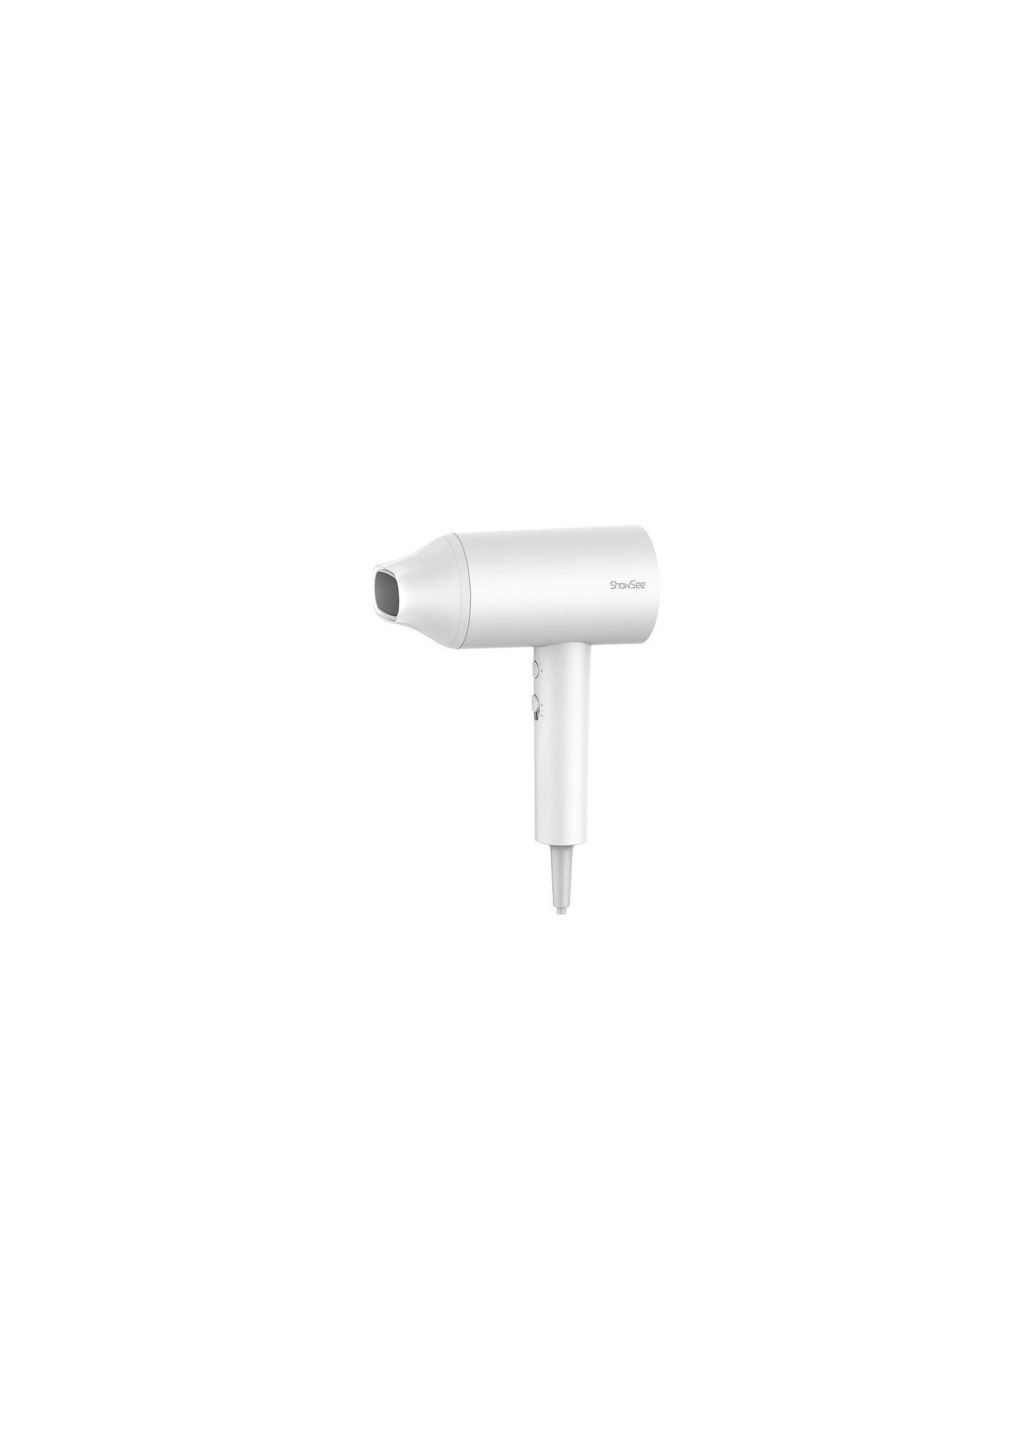 Фен ShowSee A1W White Xiaomi showsee a1-w white (276706839)